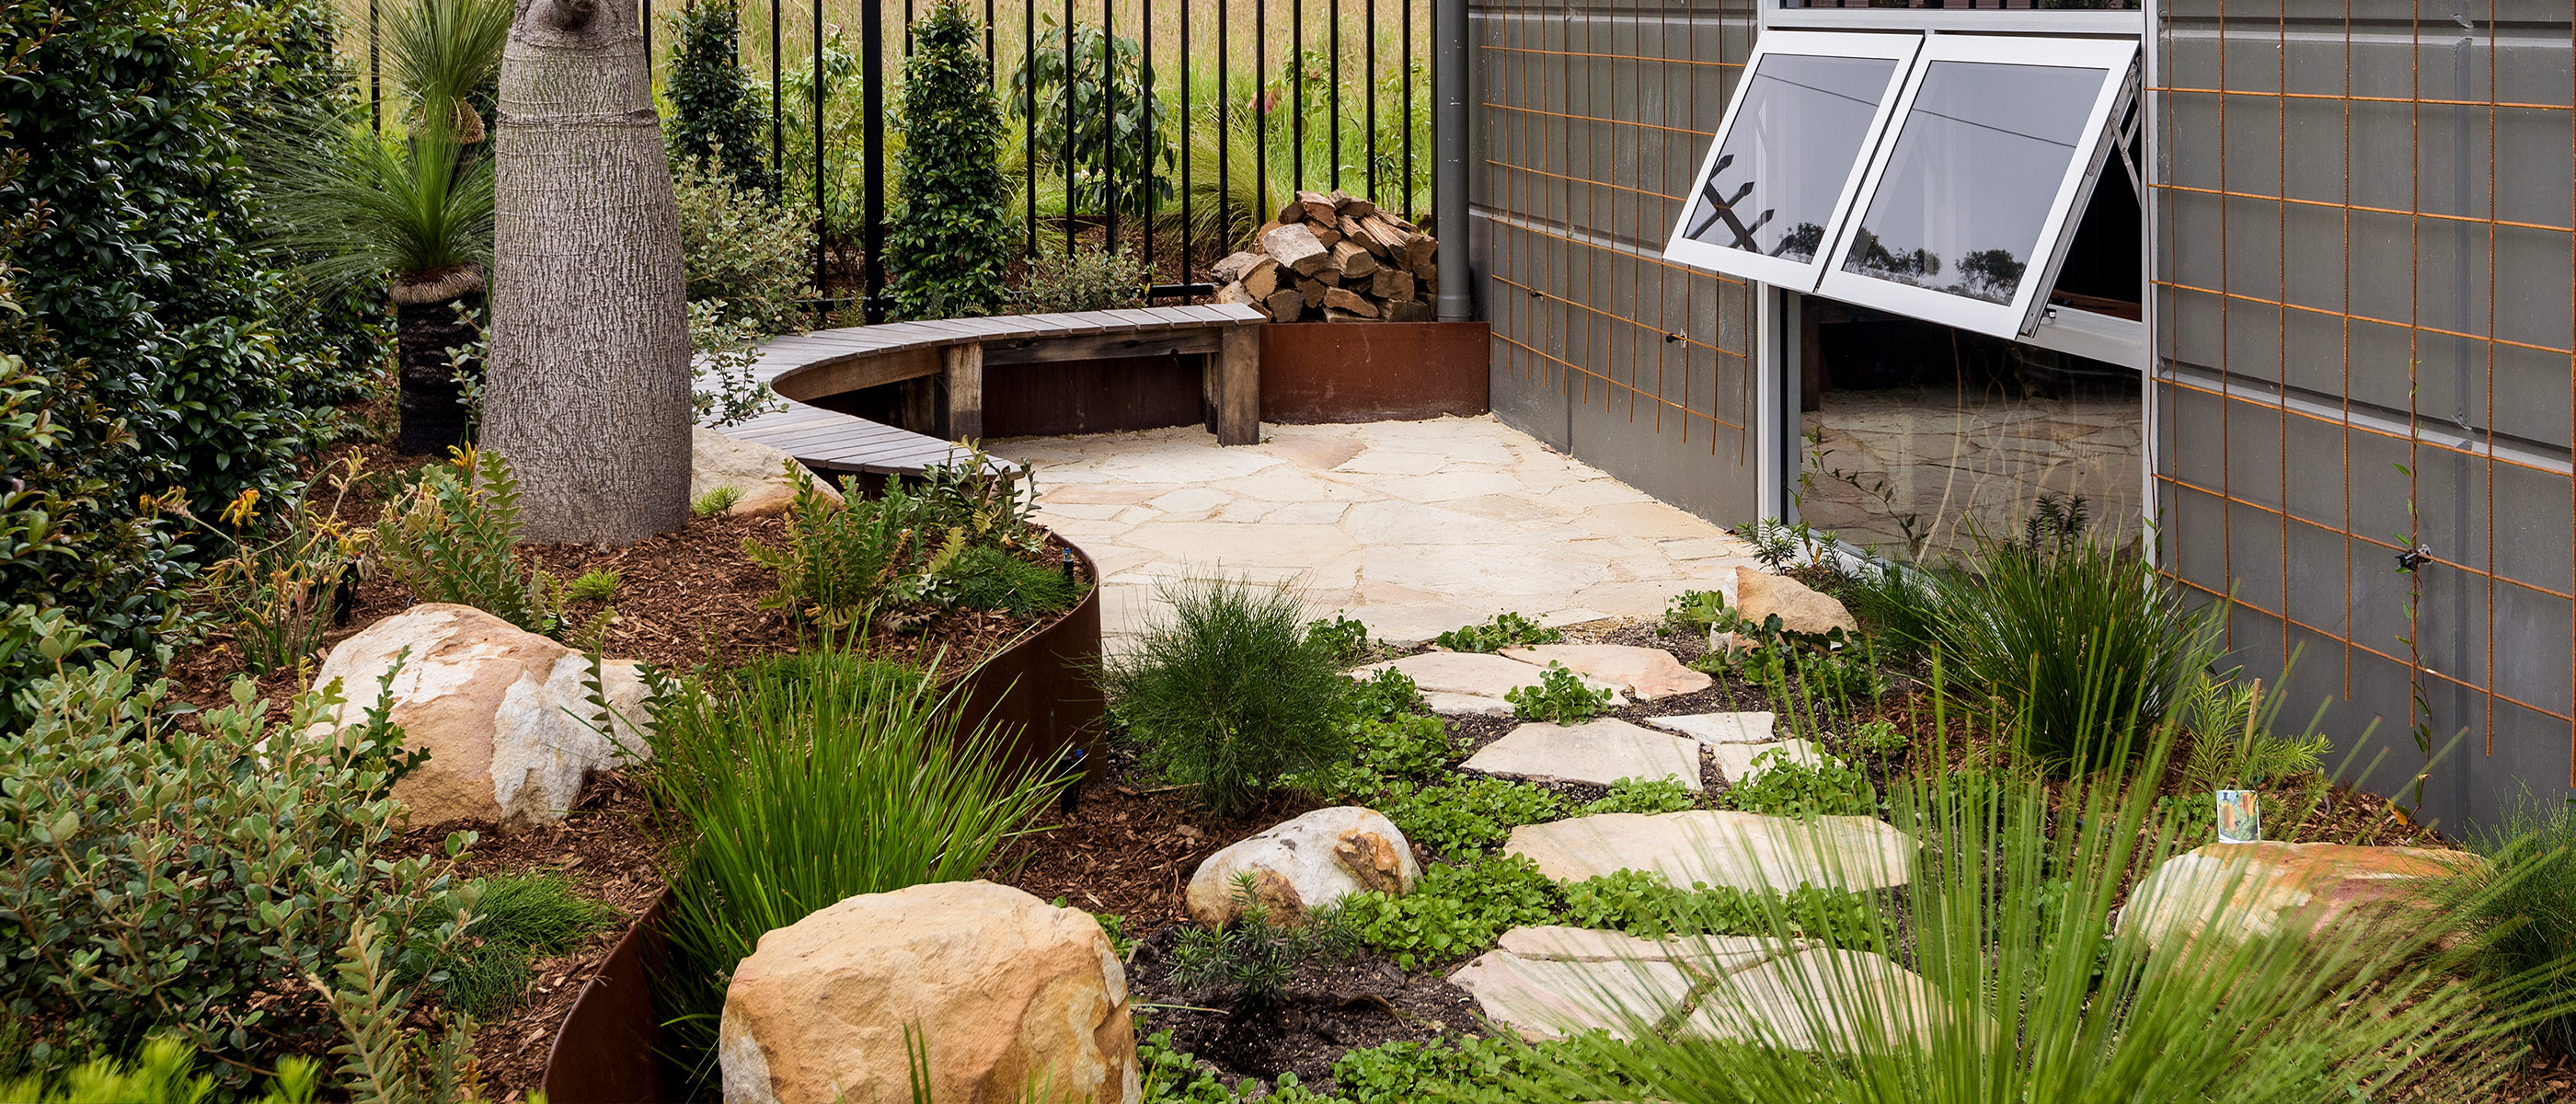 Meandering sandstone crazy pave stepper path through garden bed of dichondra and feature boulders to fire pit area with curved timber bench in courtyard